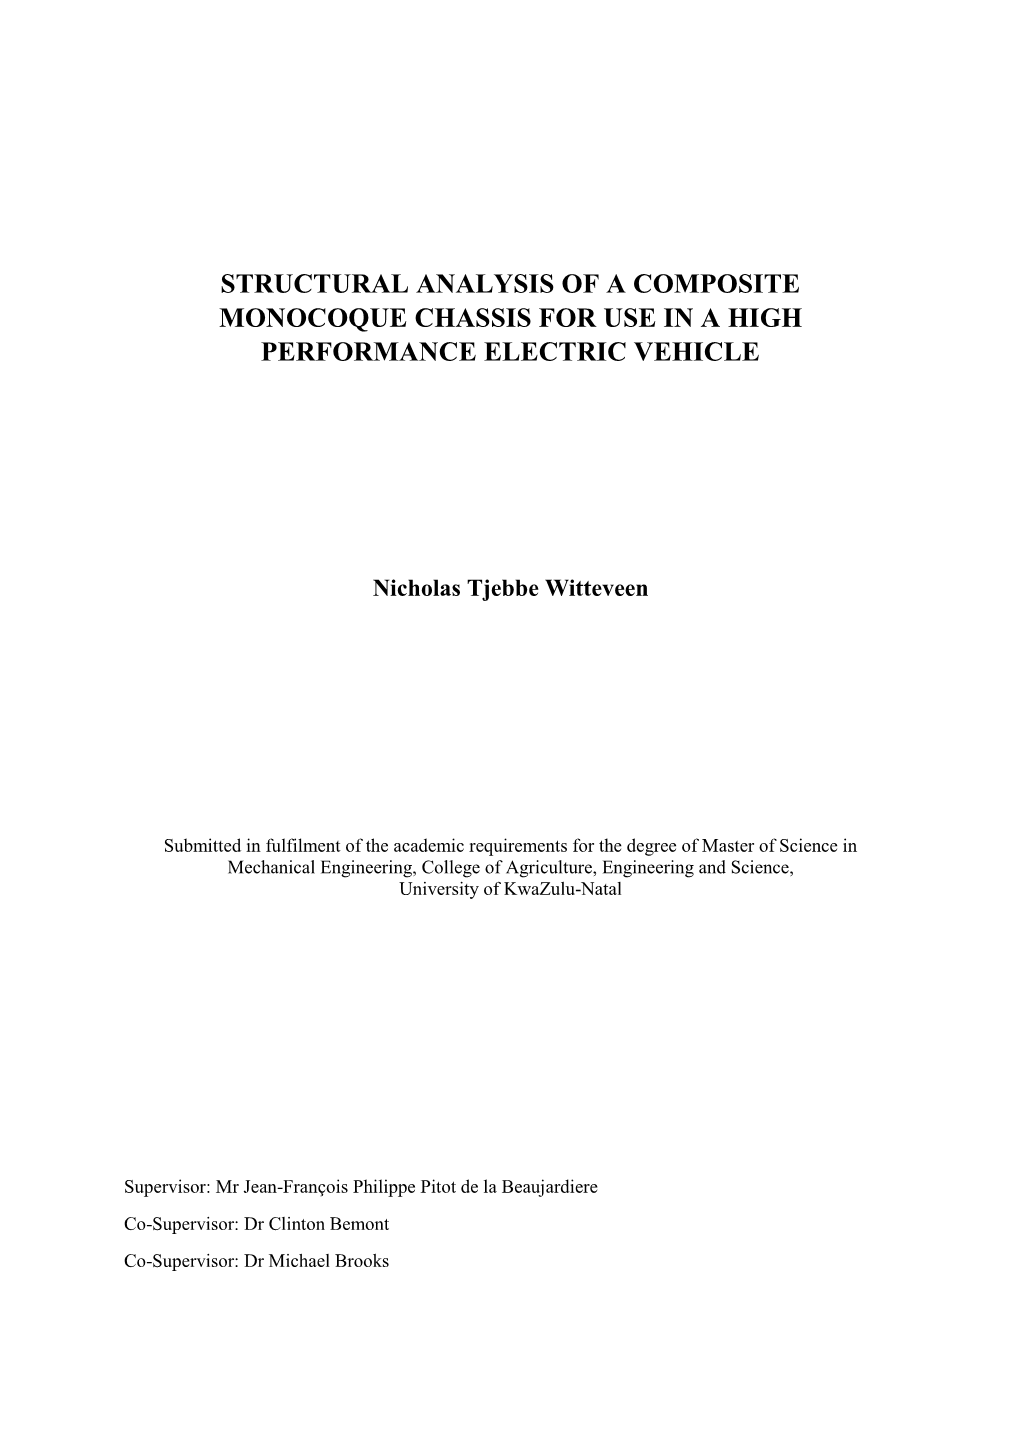 Structural Analysis of a Composite Monocoque Chassis for Use in a High Performance Electric Vehicle